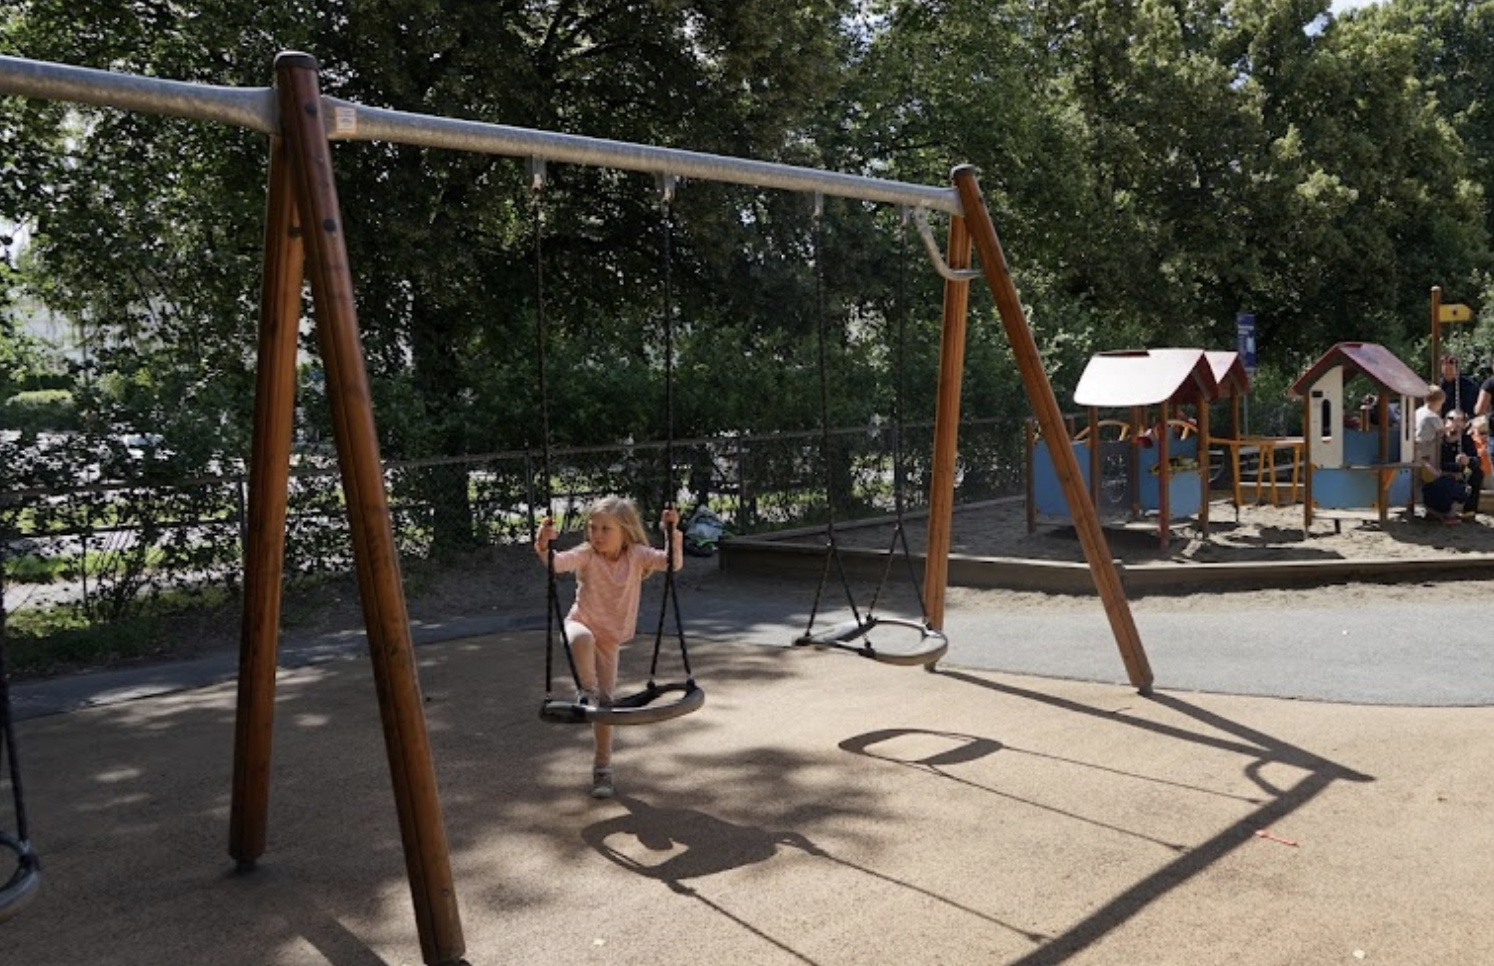 The Frogner Park Playground (near the main entrance)